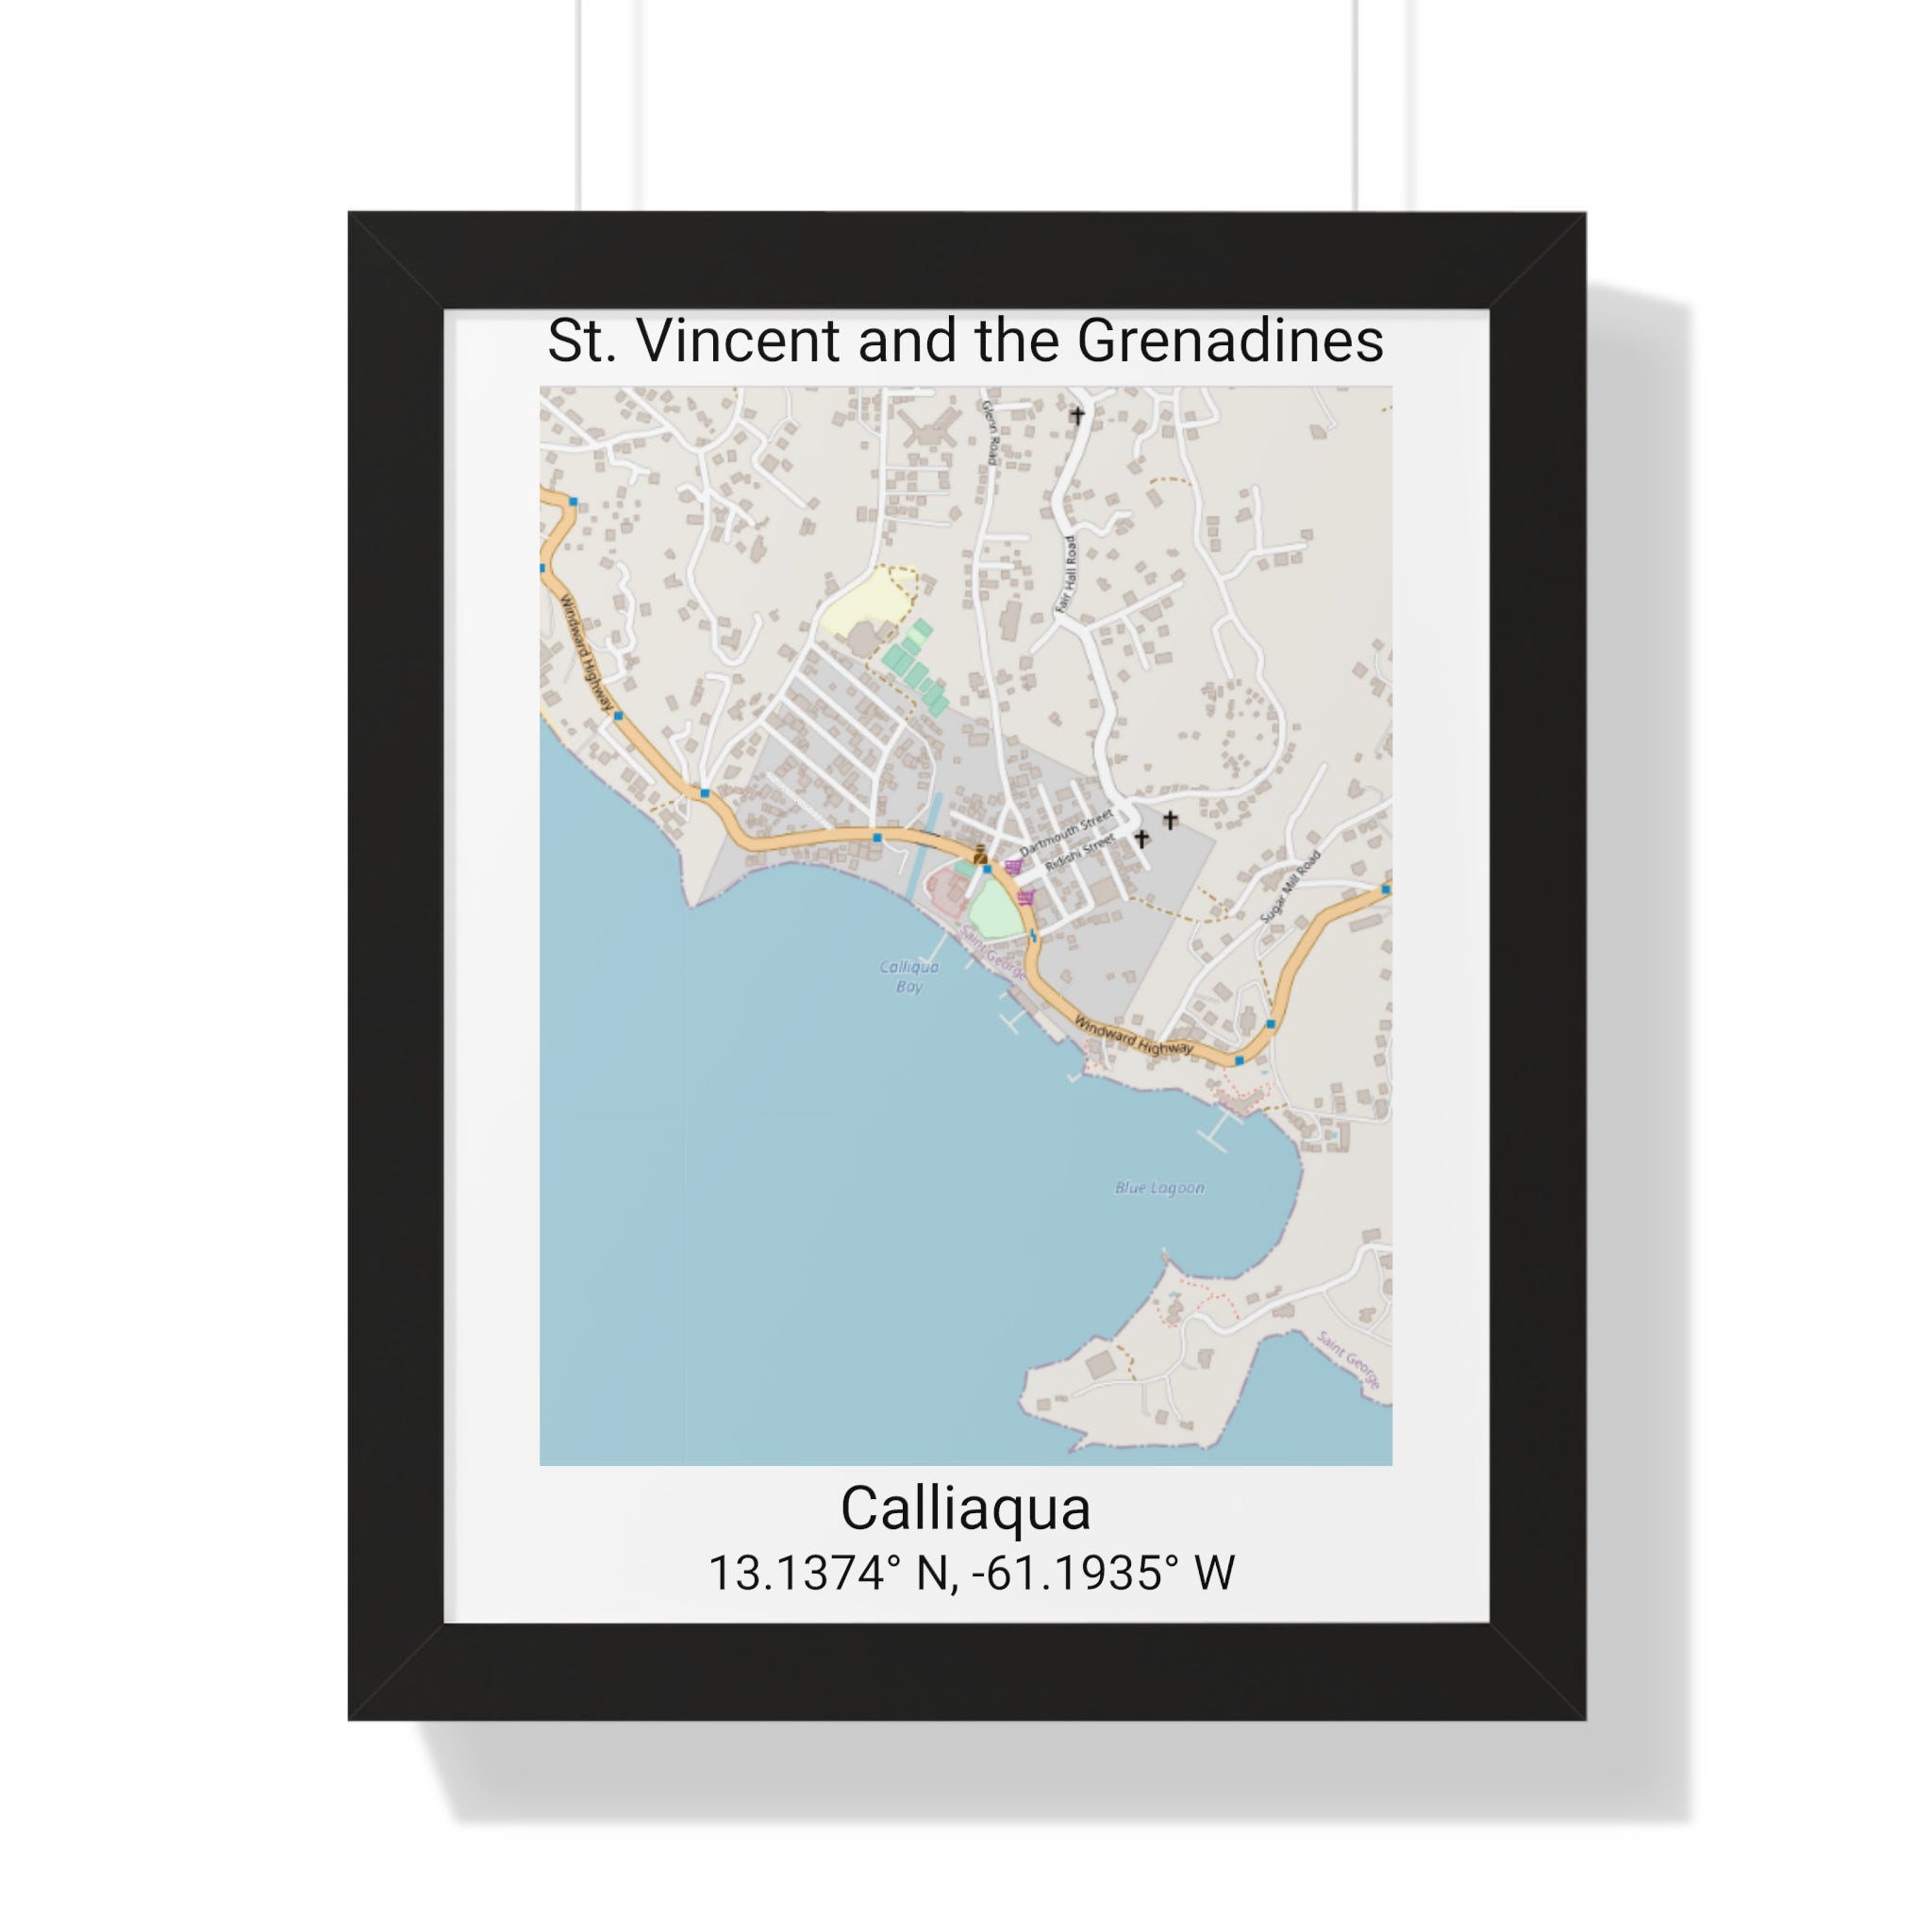 Calliaqua St. Vincent and the Grenadines Map Framed Print Poster, City Map Print Poster. Village Map Print Poster, Road Map Print Poster, Framed Vertical Poster